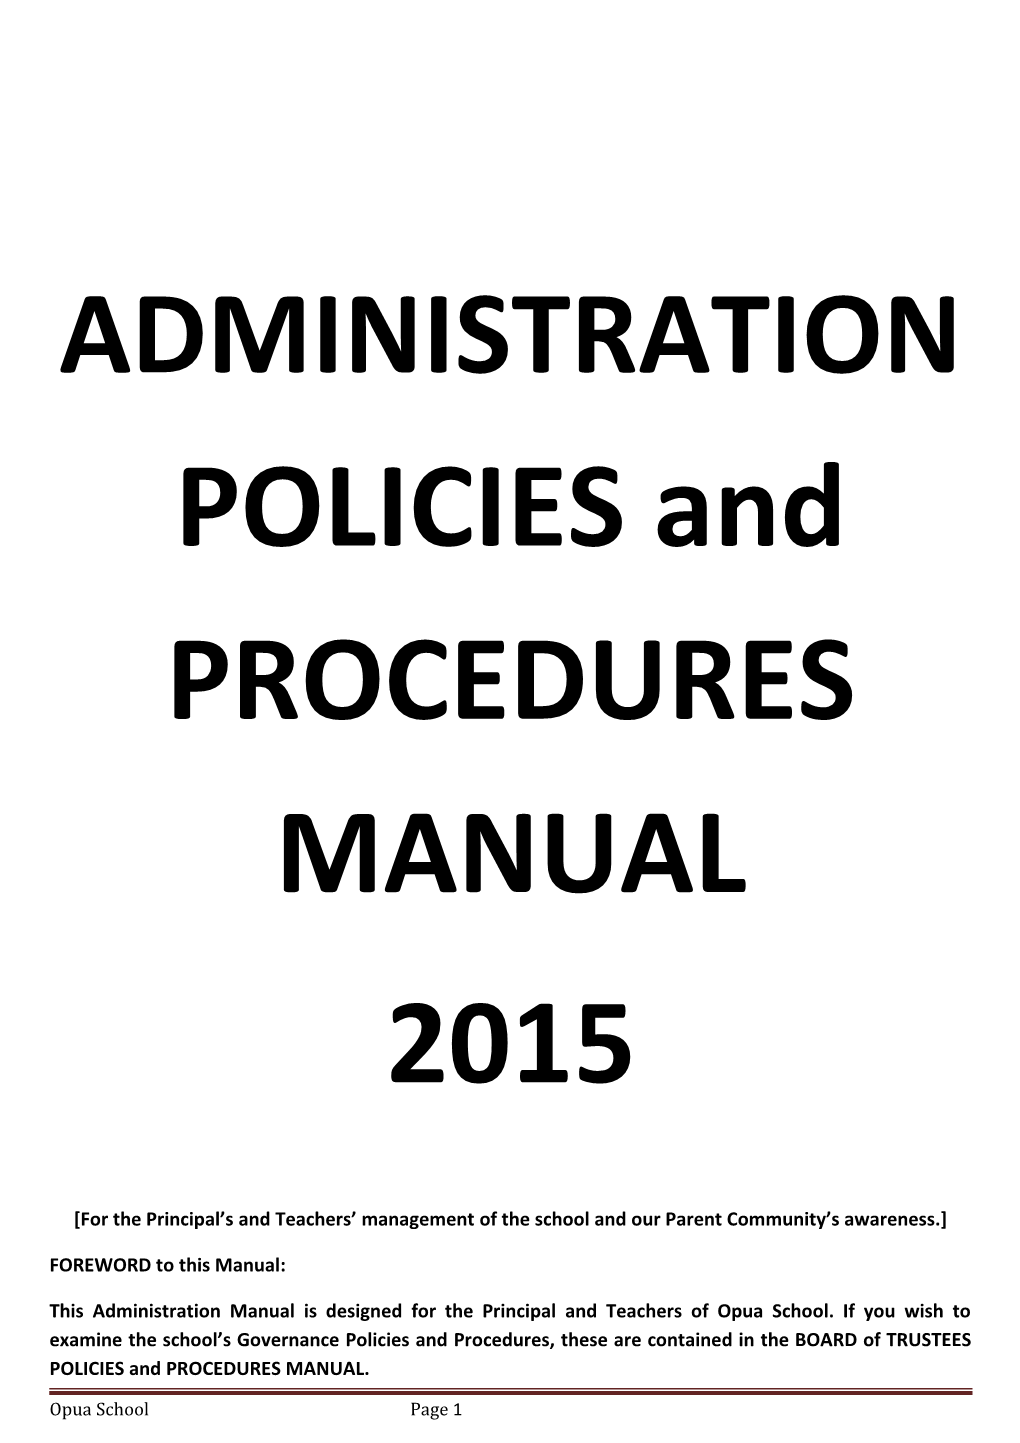 ADMINISTRATION POLICIES and PROCEDURES MANUAL